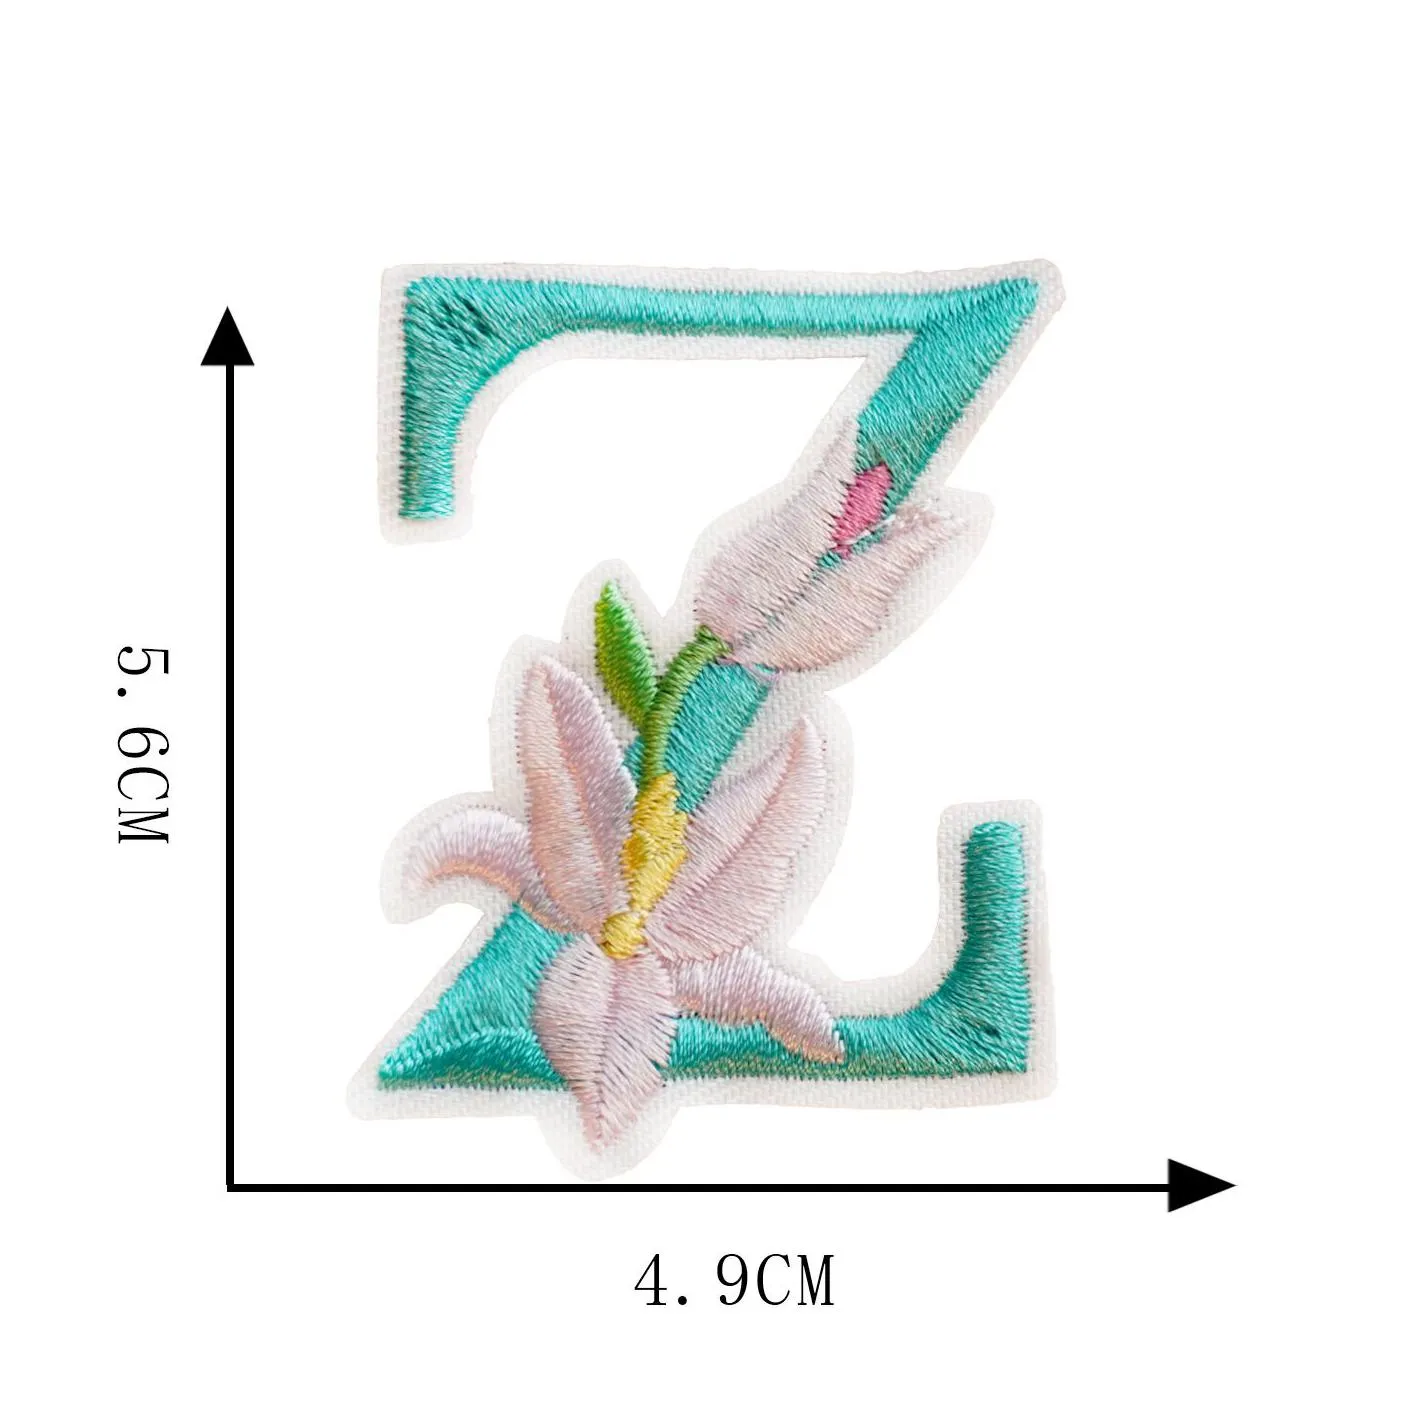 iron on flower letteres sewing notion embroidered letters a-z colorful flowers shape alphabet applique for clothes hat shirts bags diy